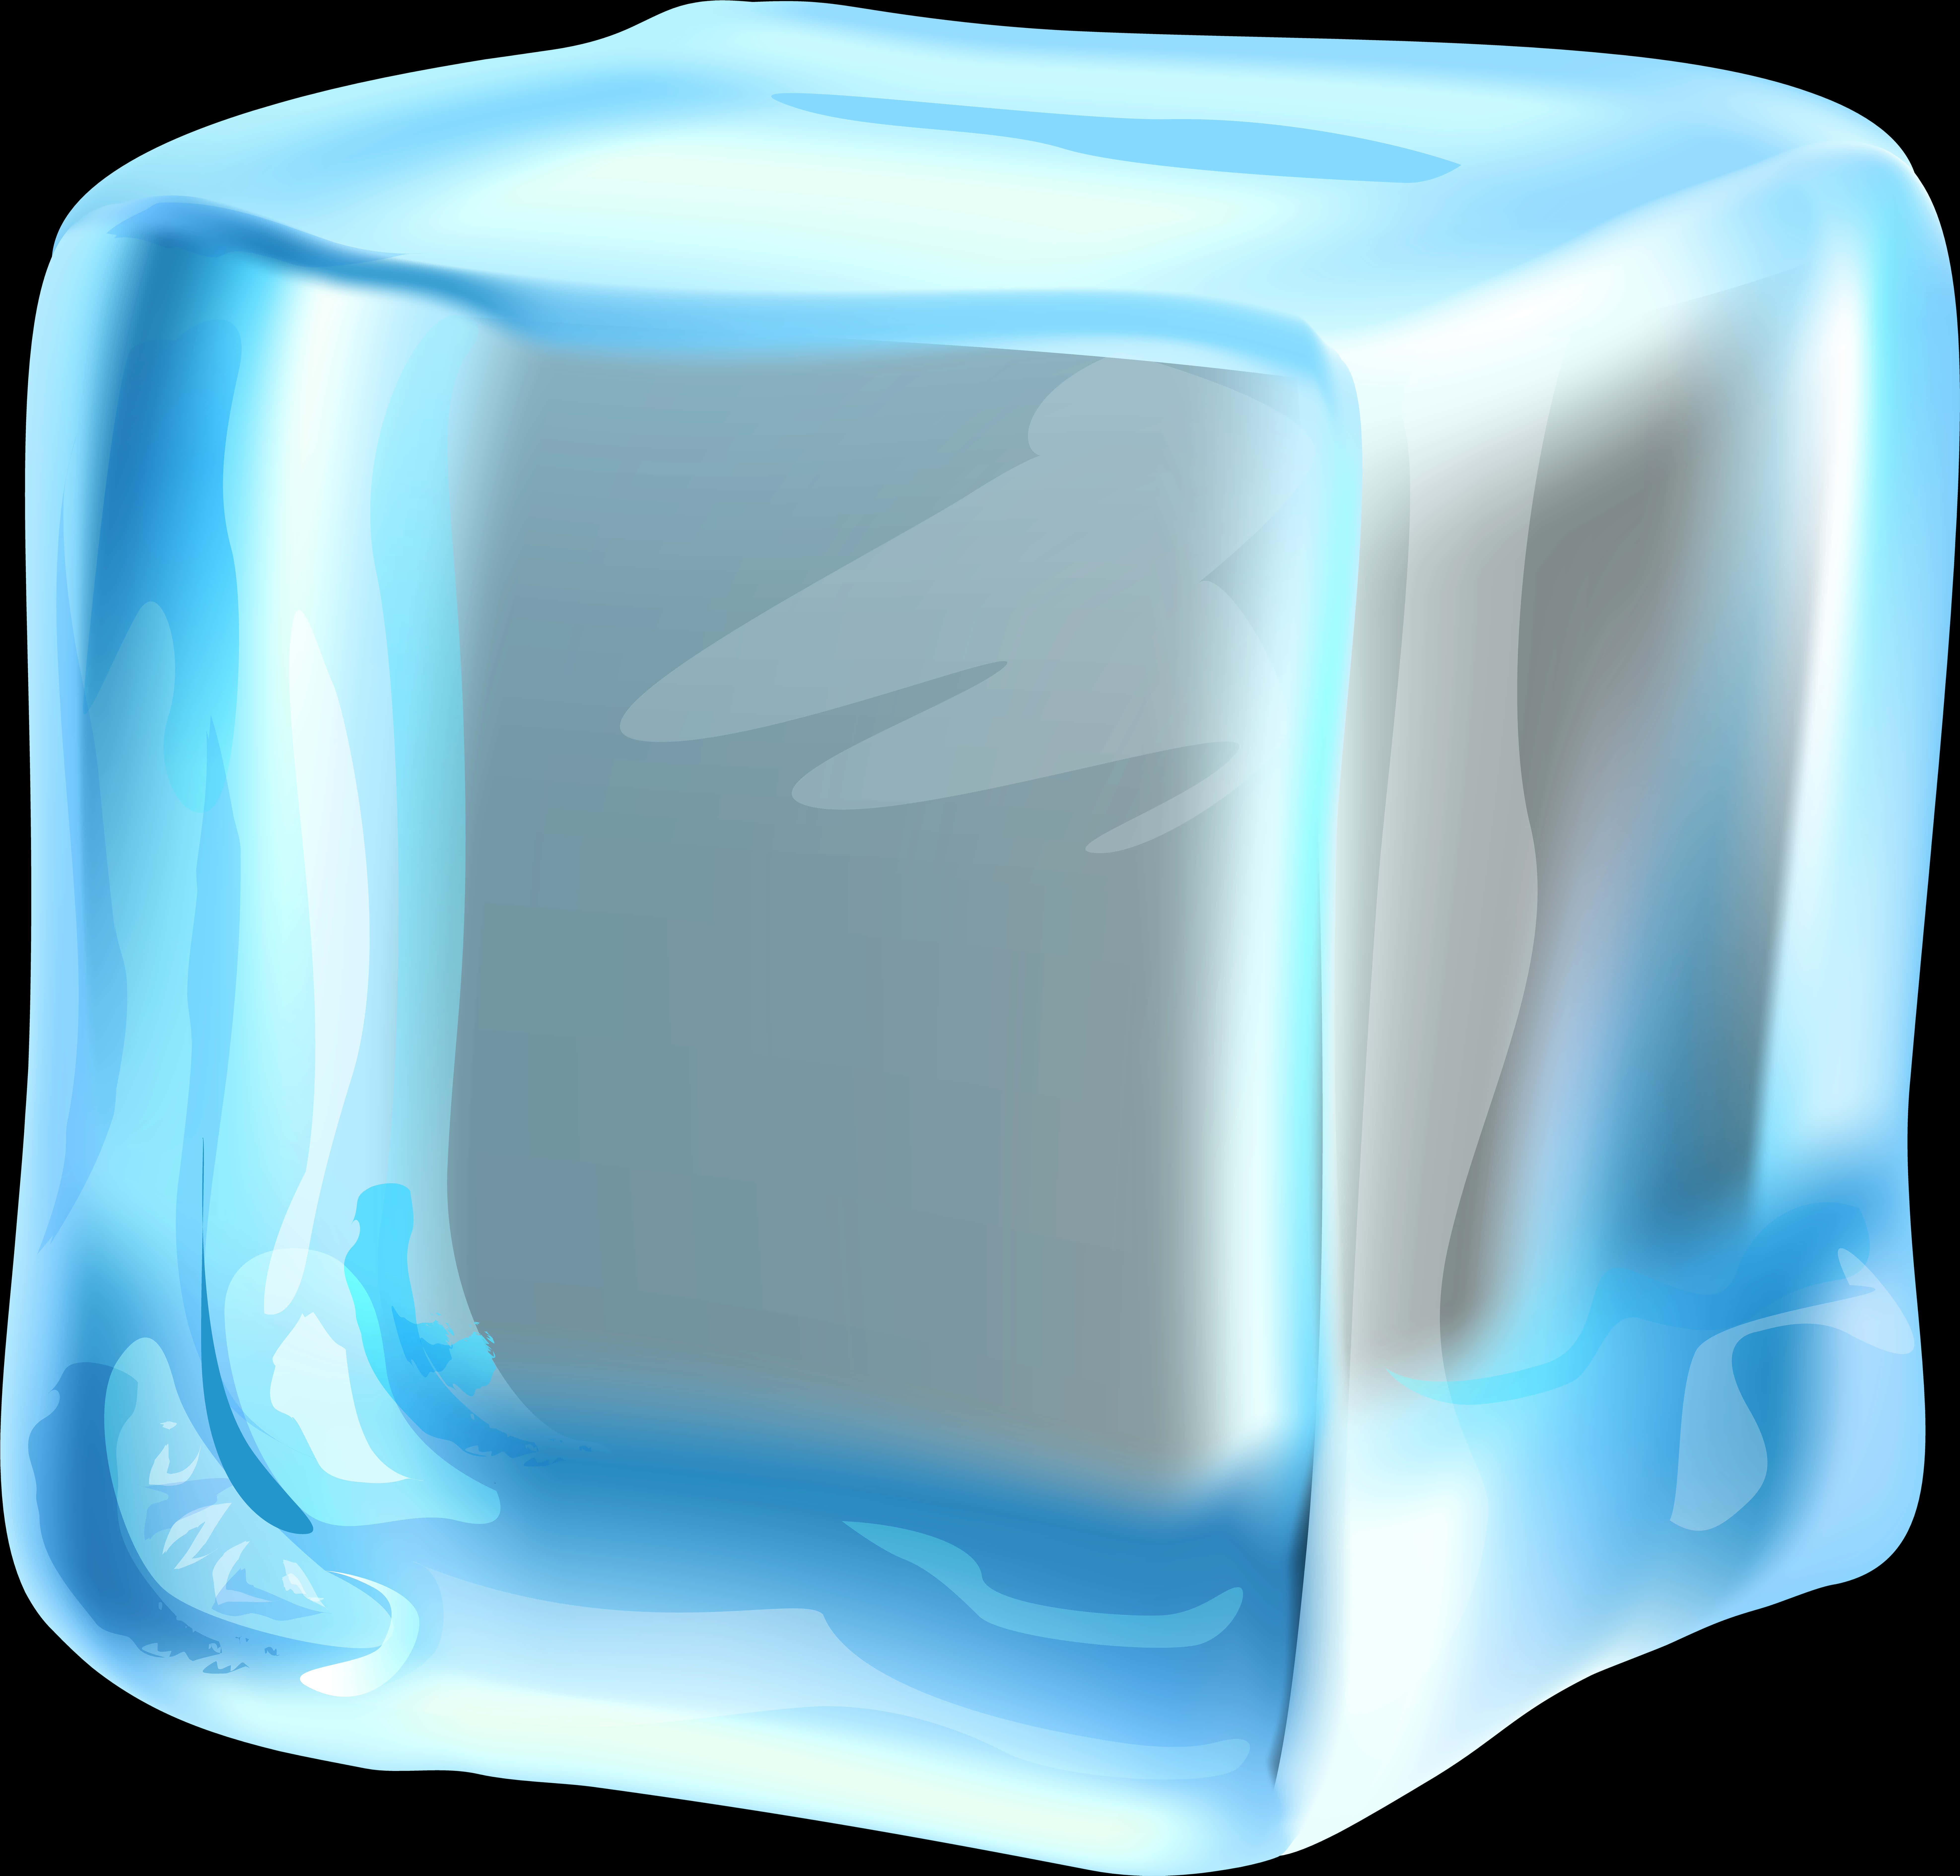 Glossy Ice Cube Illustration PNG image